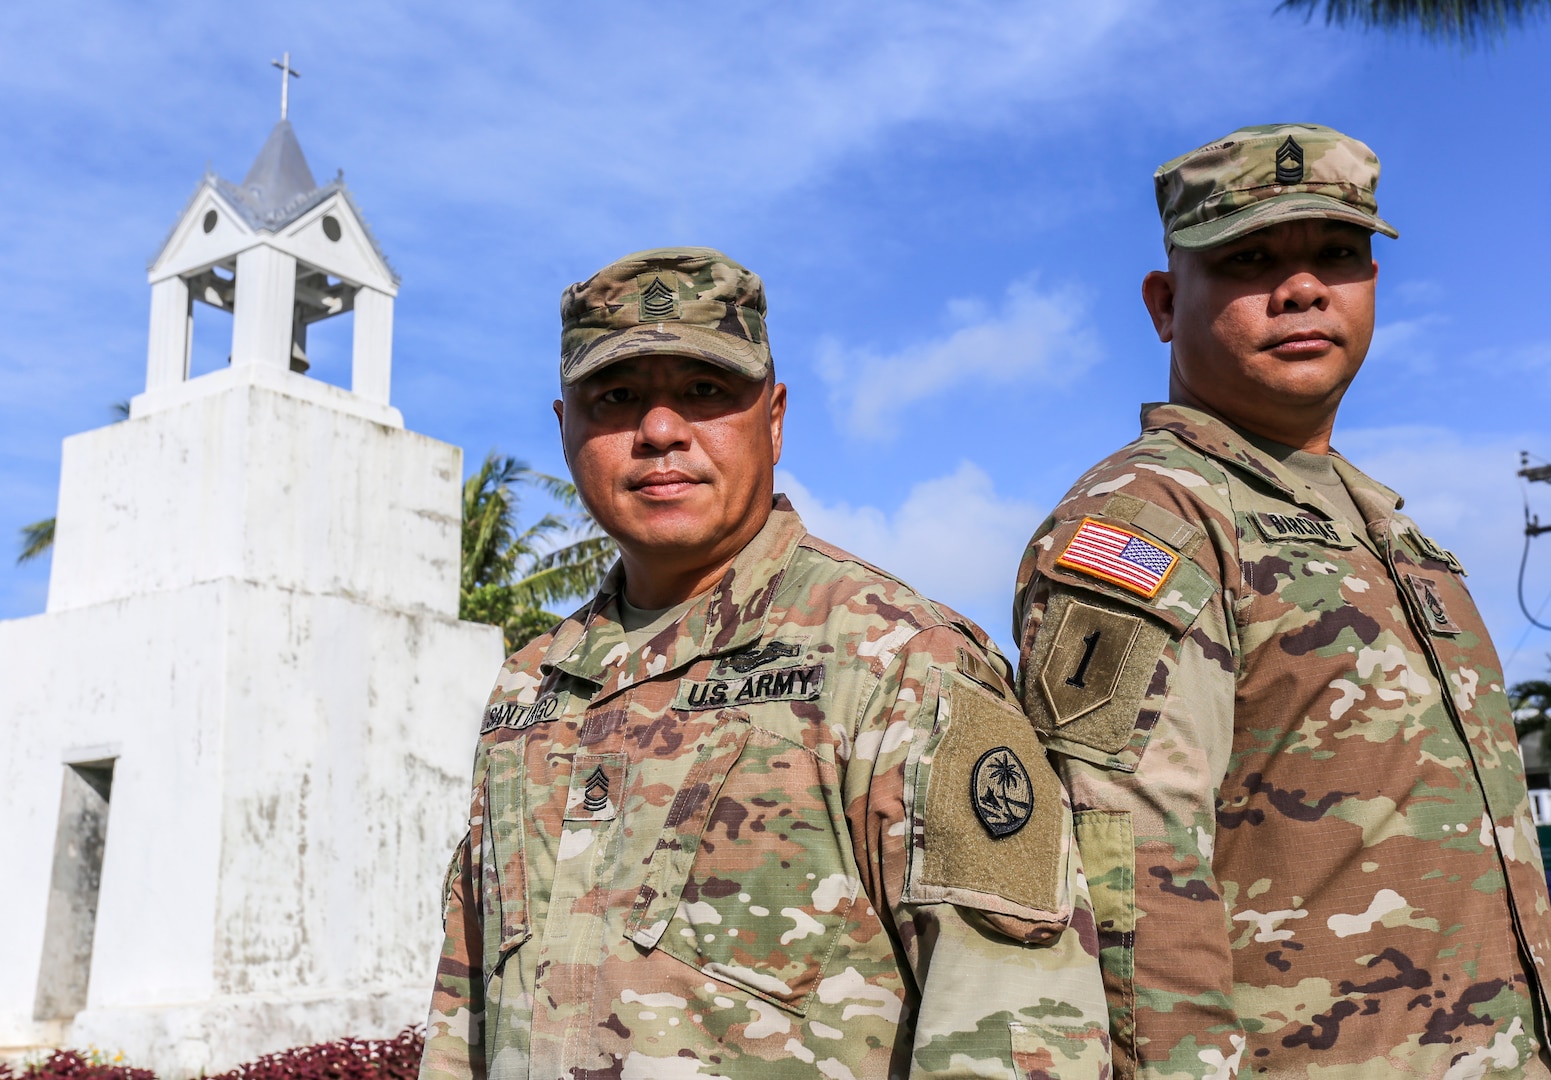 Brothers-in-law and Master Sgts. Joseph Santiago, left, and Andrew Barcinas, of the Guam National Guard, prepare for the Sergeants Major Academy in Merizo, Guam on May 15.